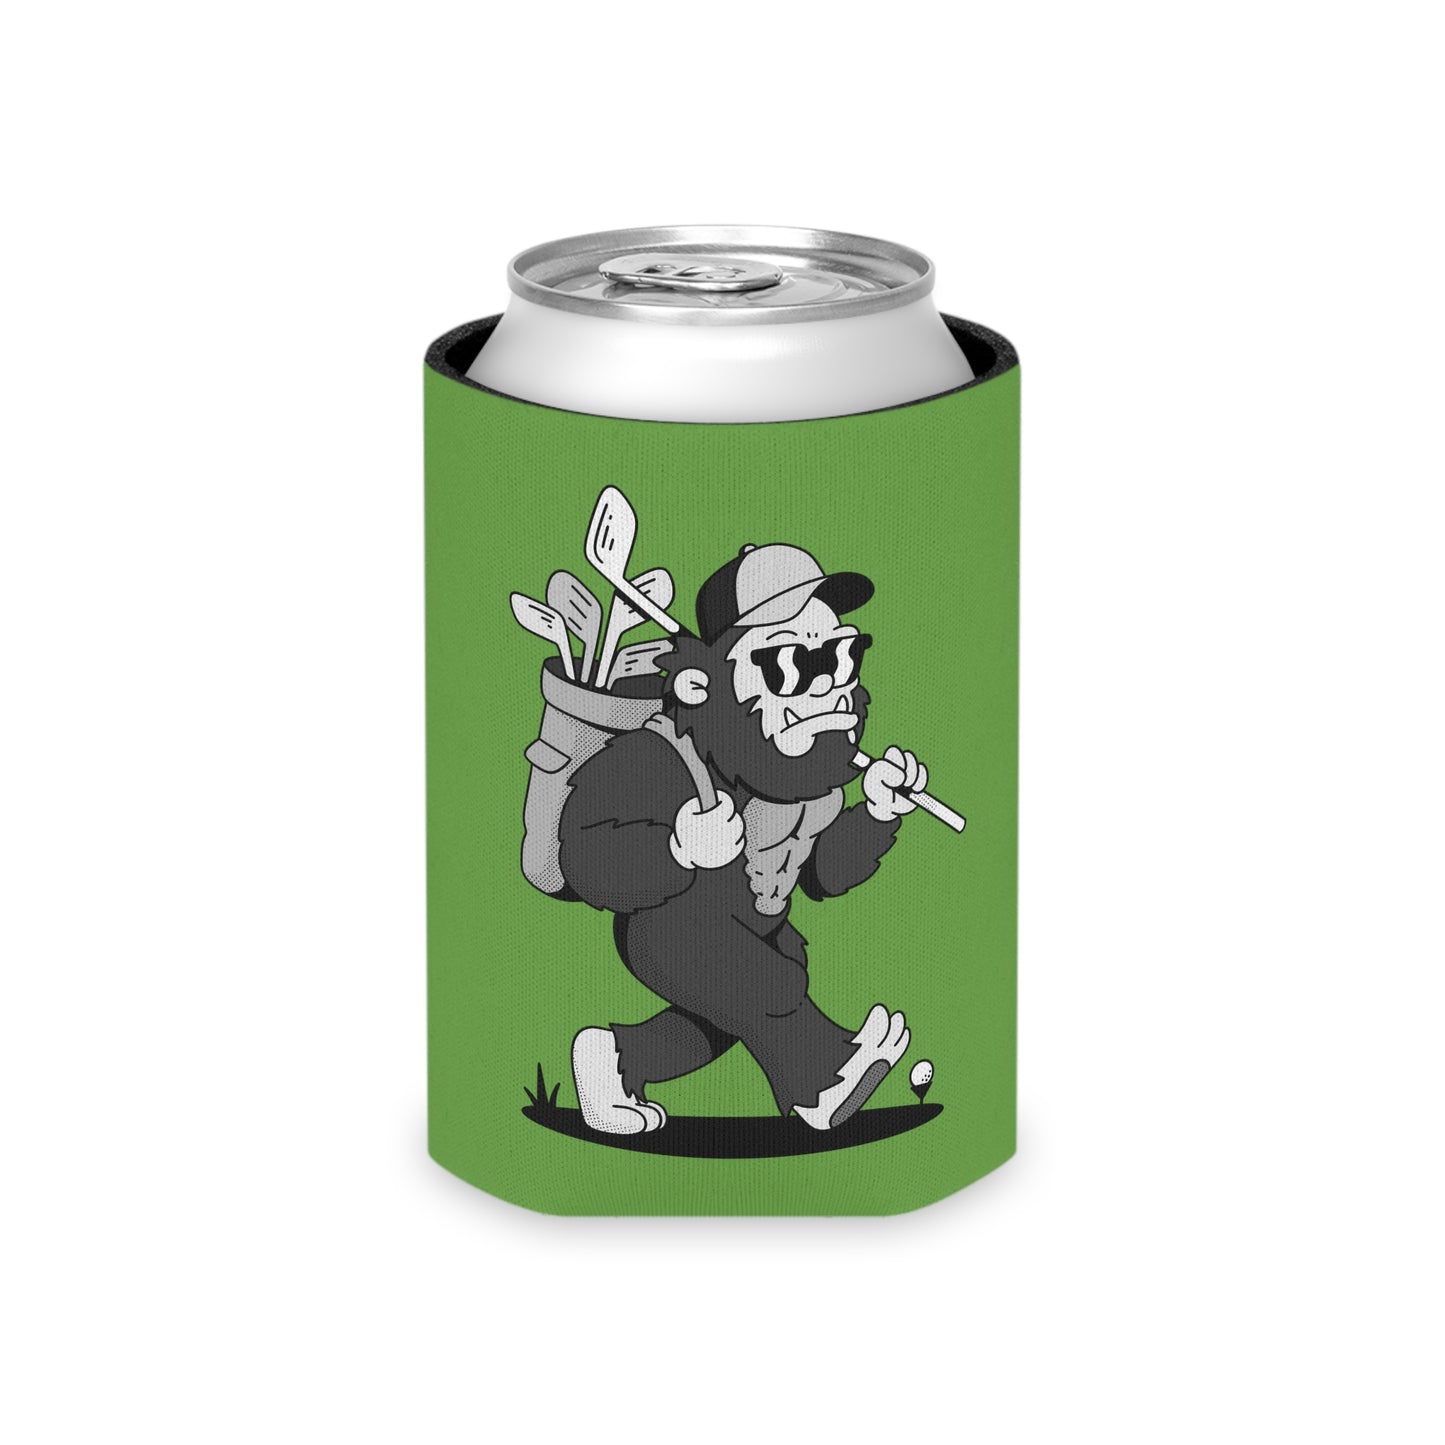 The Golfer - Can Cooler